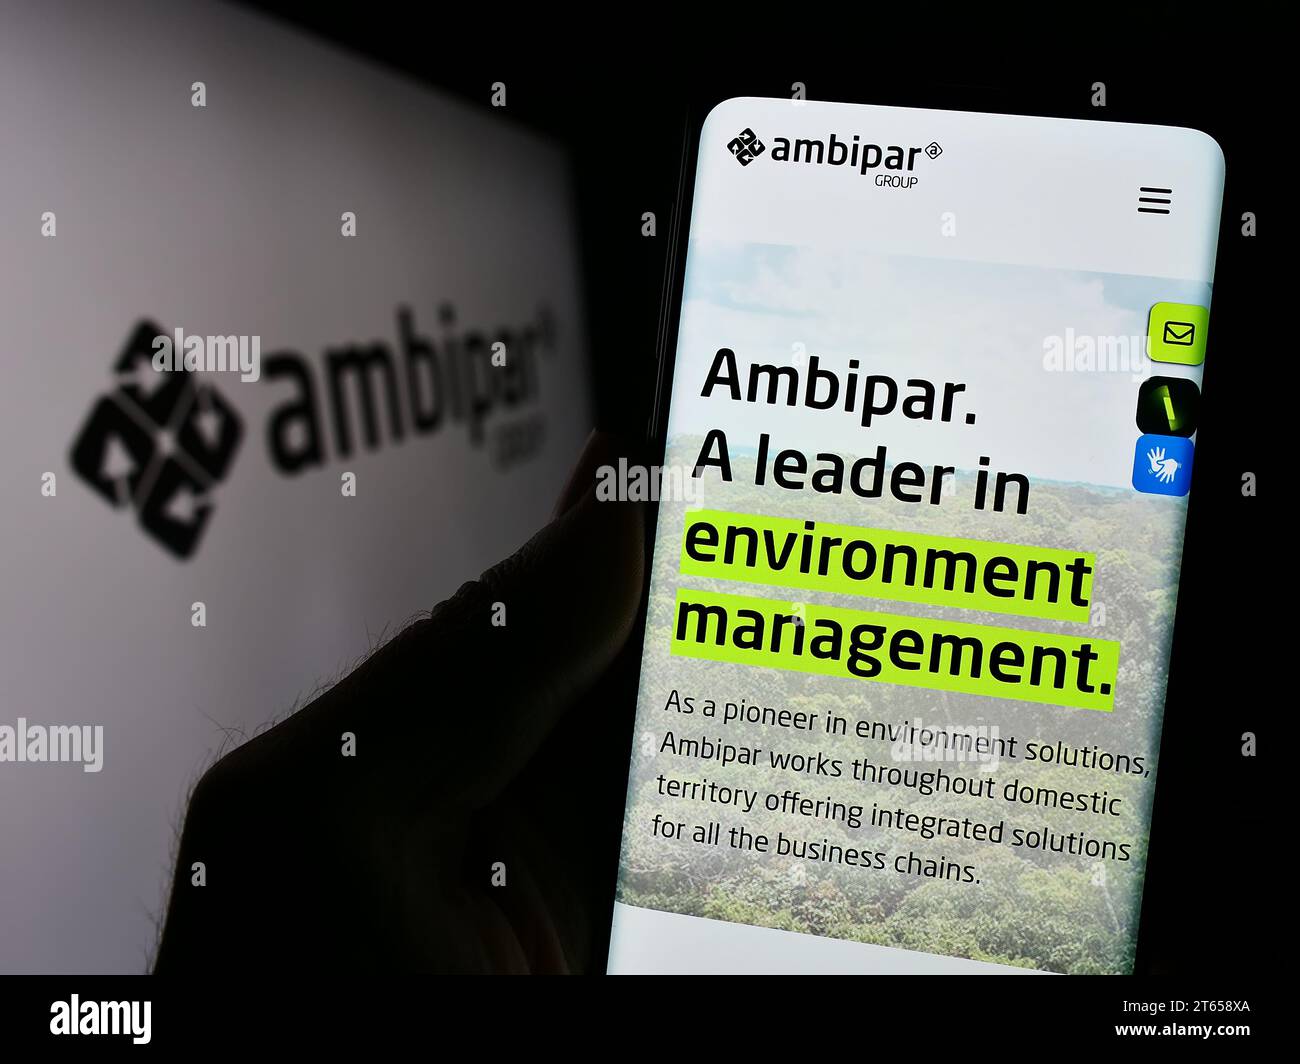 Person holding cellphone with webpage of Brazilian environmental services company Ambipar Group with logo. Focus on center of phone display. Stock Photo